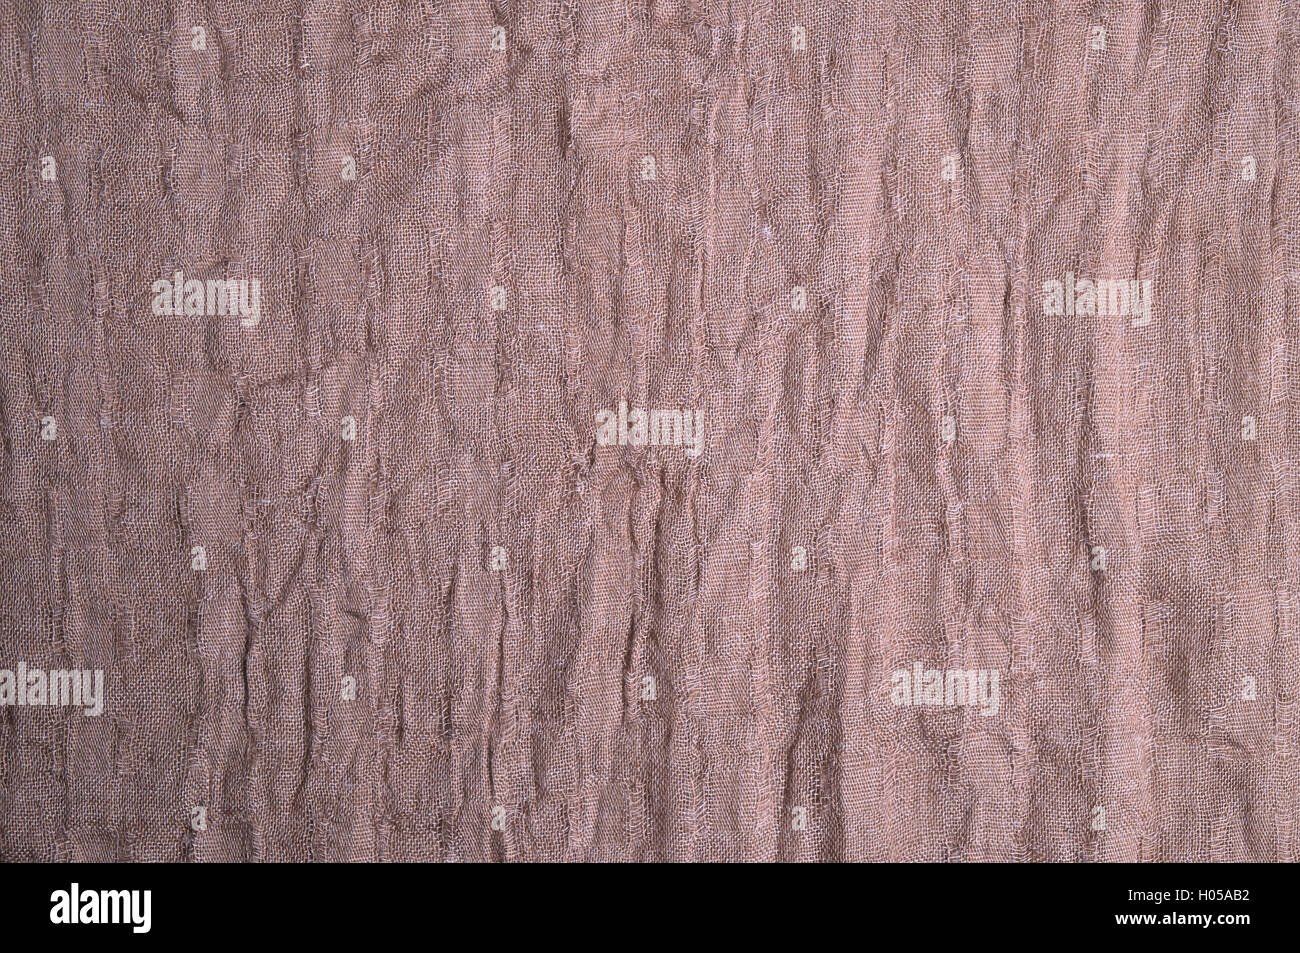 Brown light cotton scarf. Fashion, textures and backgrounds Stock Photo